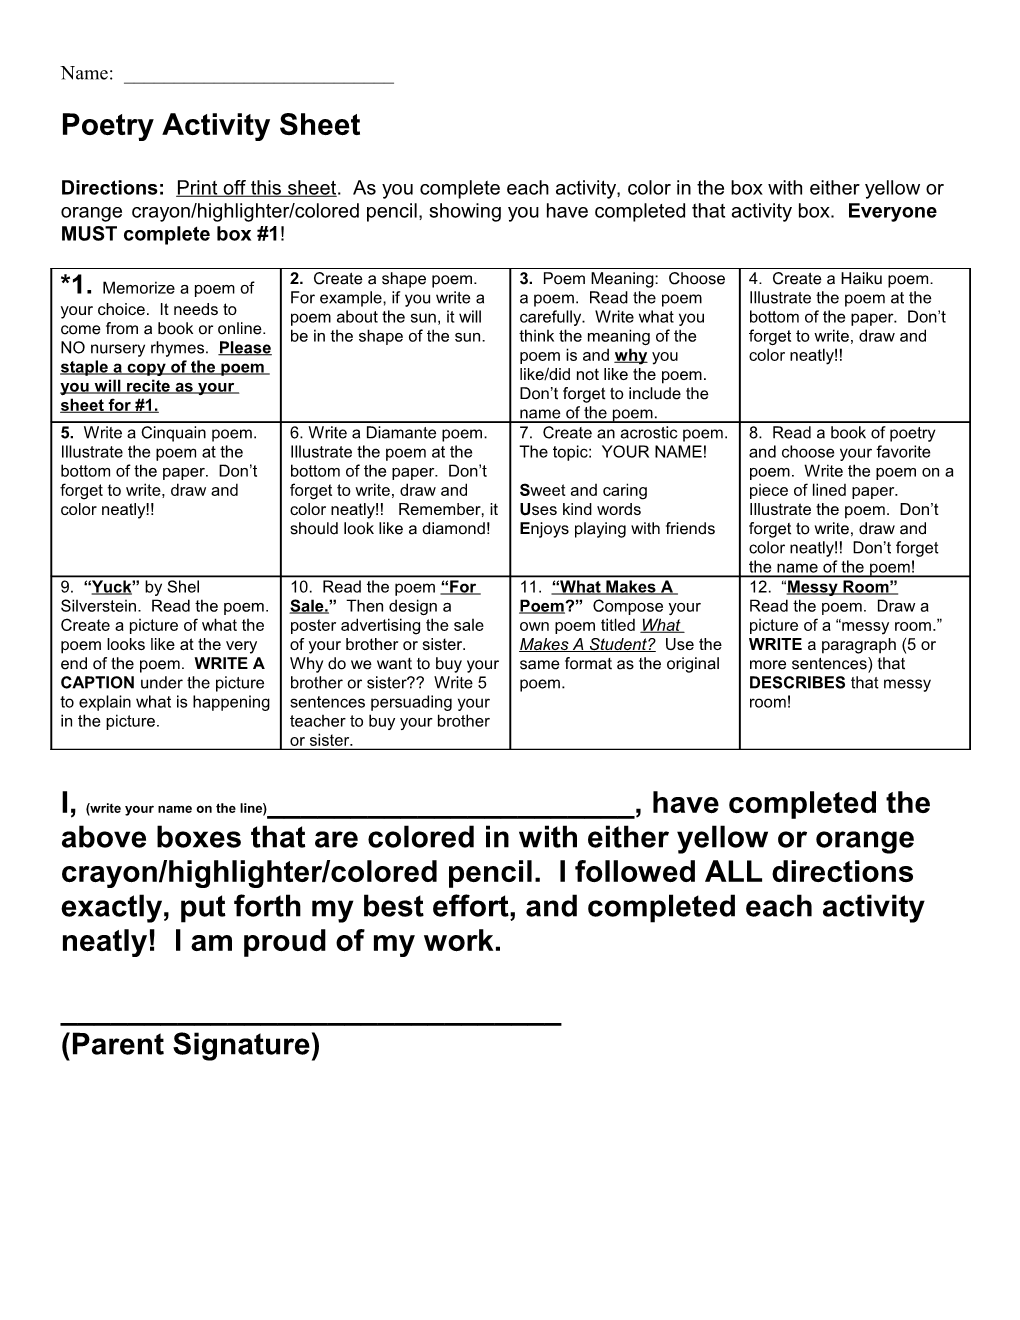 Poetry Activity Sheet